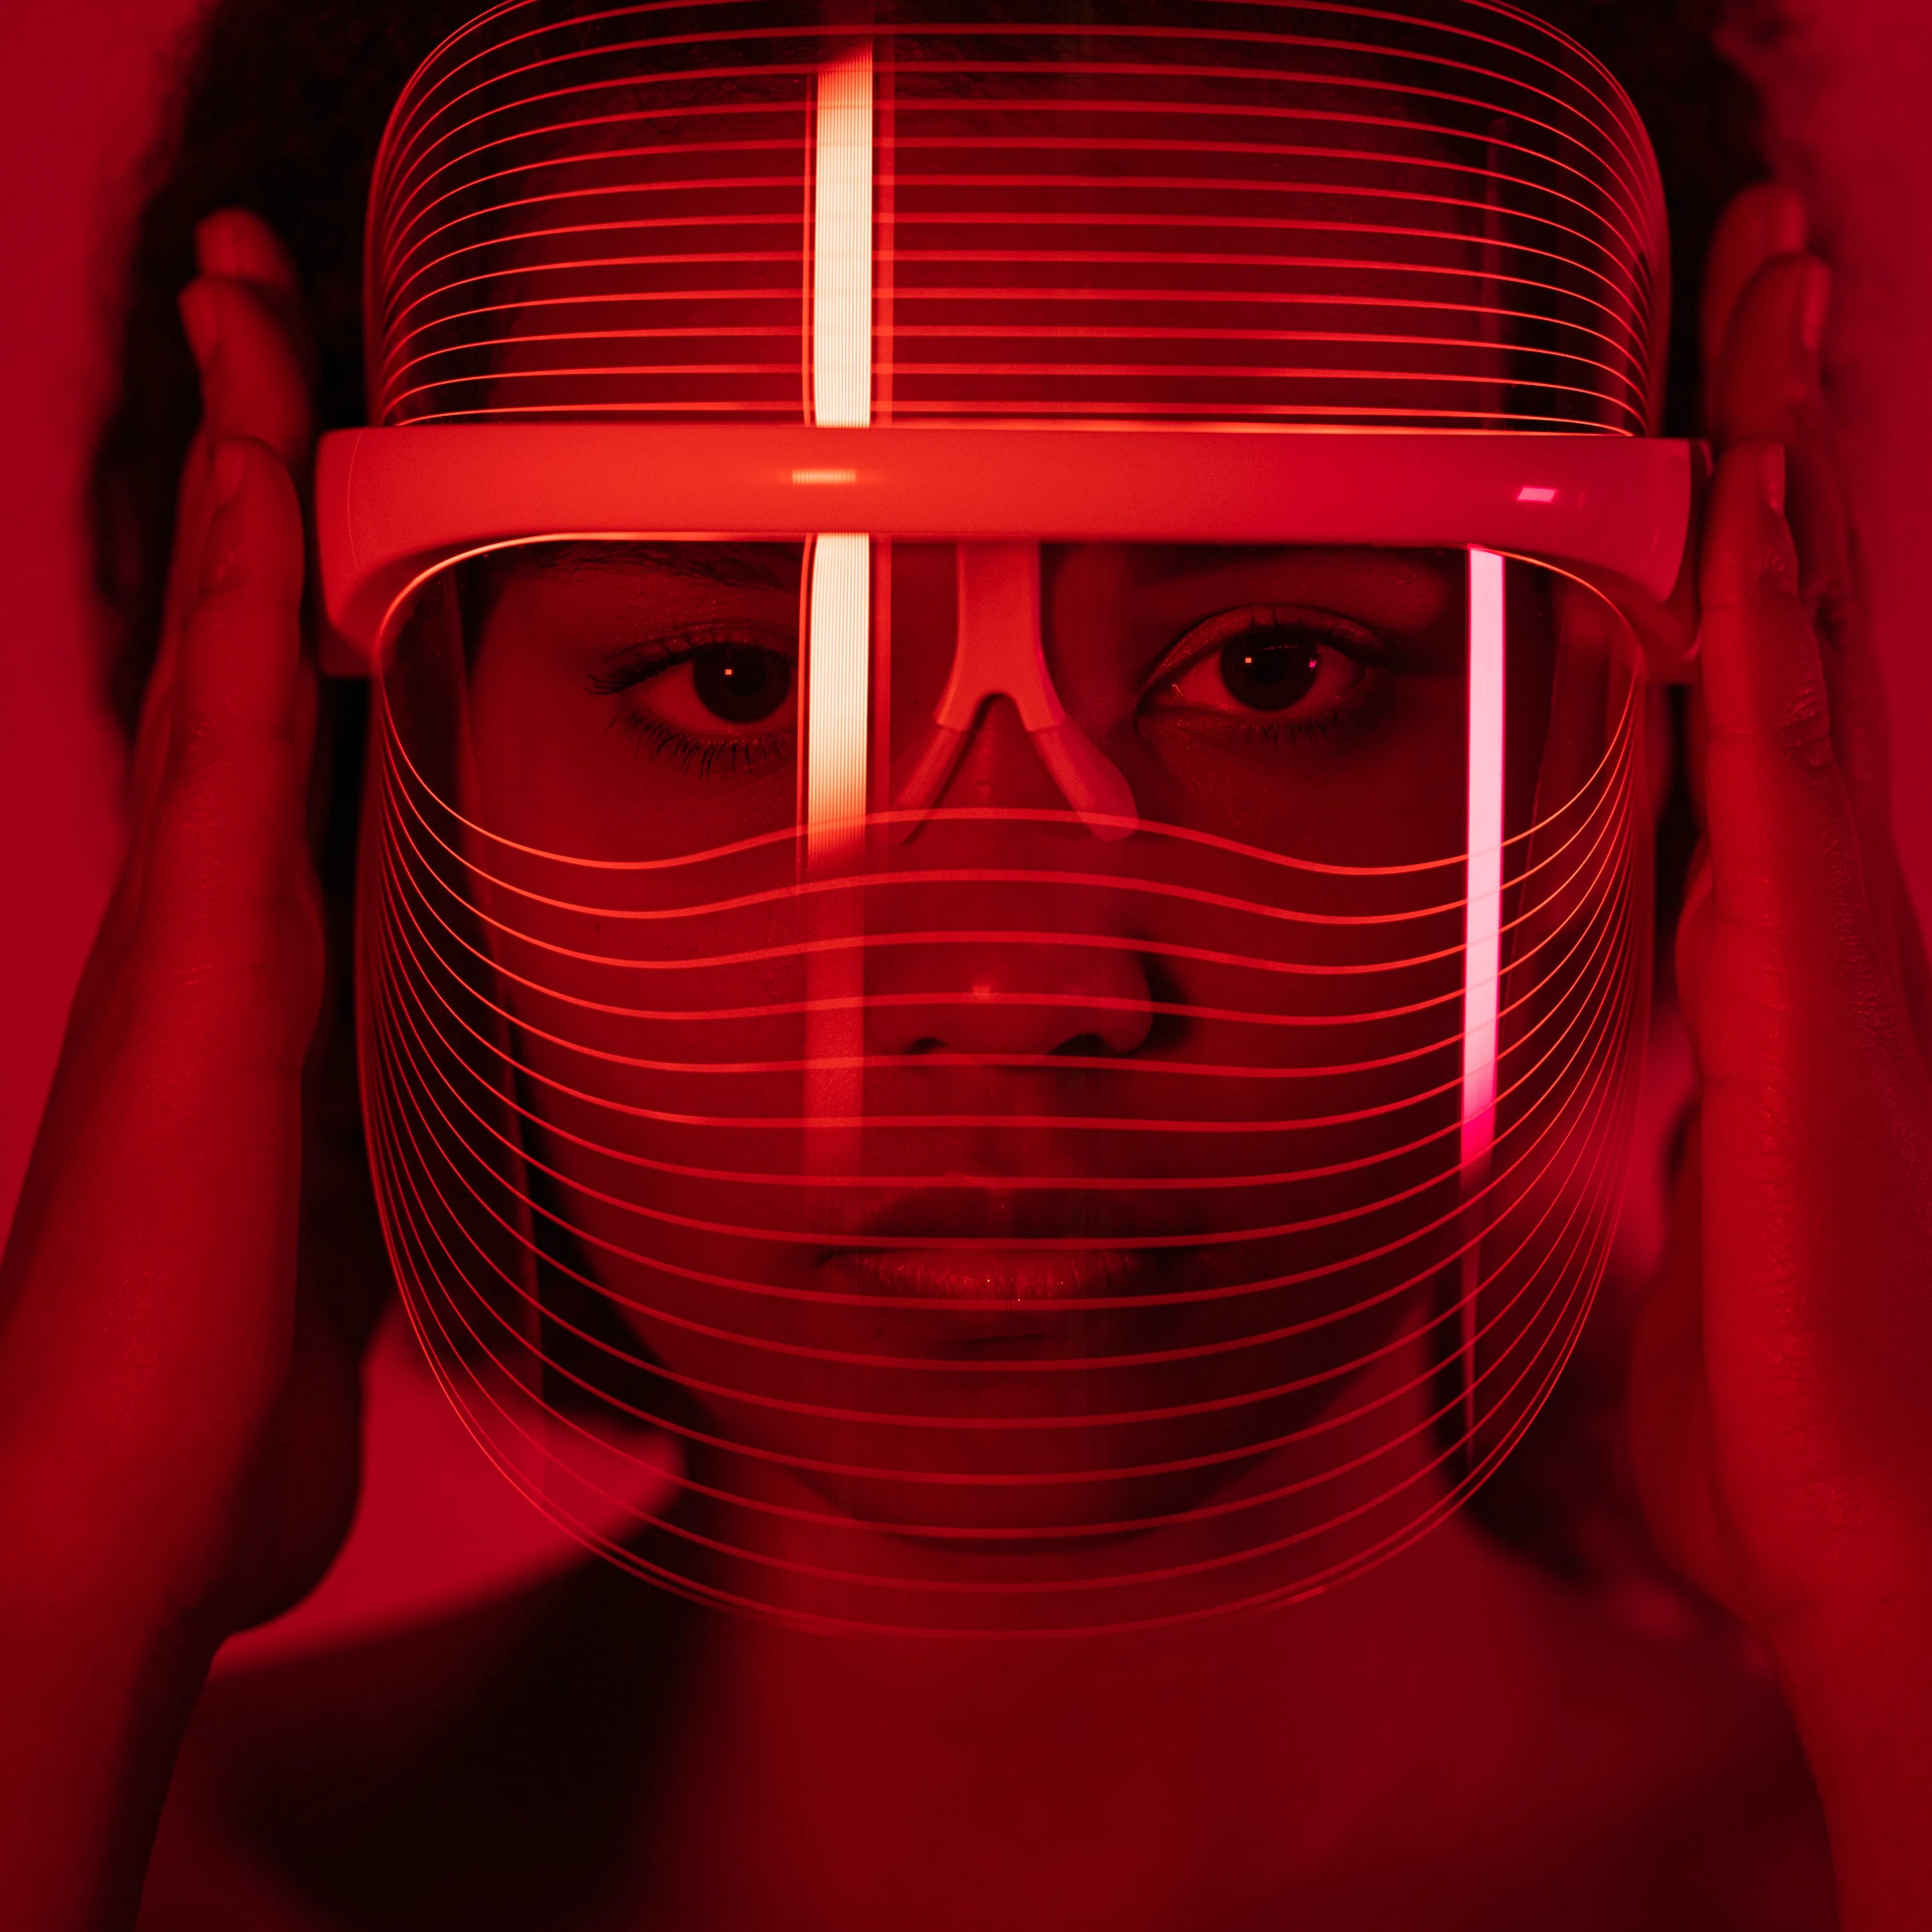 5 Reasons to Incorporate Red Light Therapy into Your Anti-Aging Skincare Routine (Plus Bonus!)